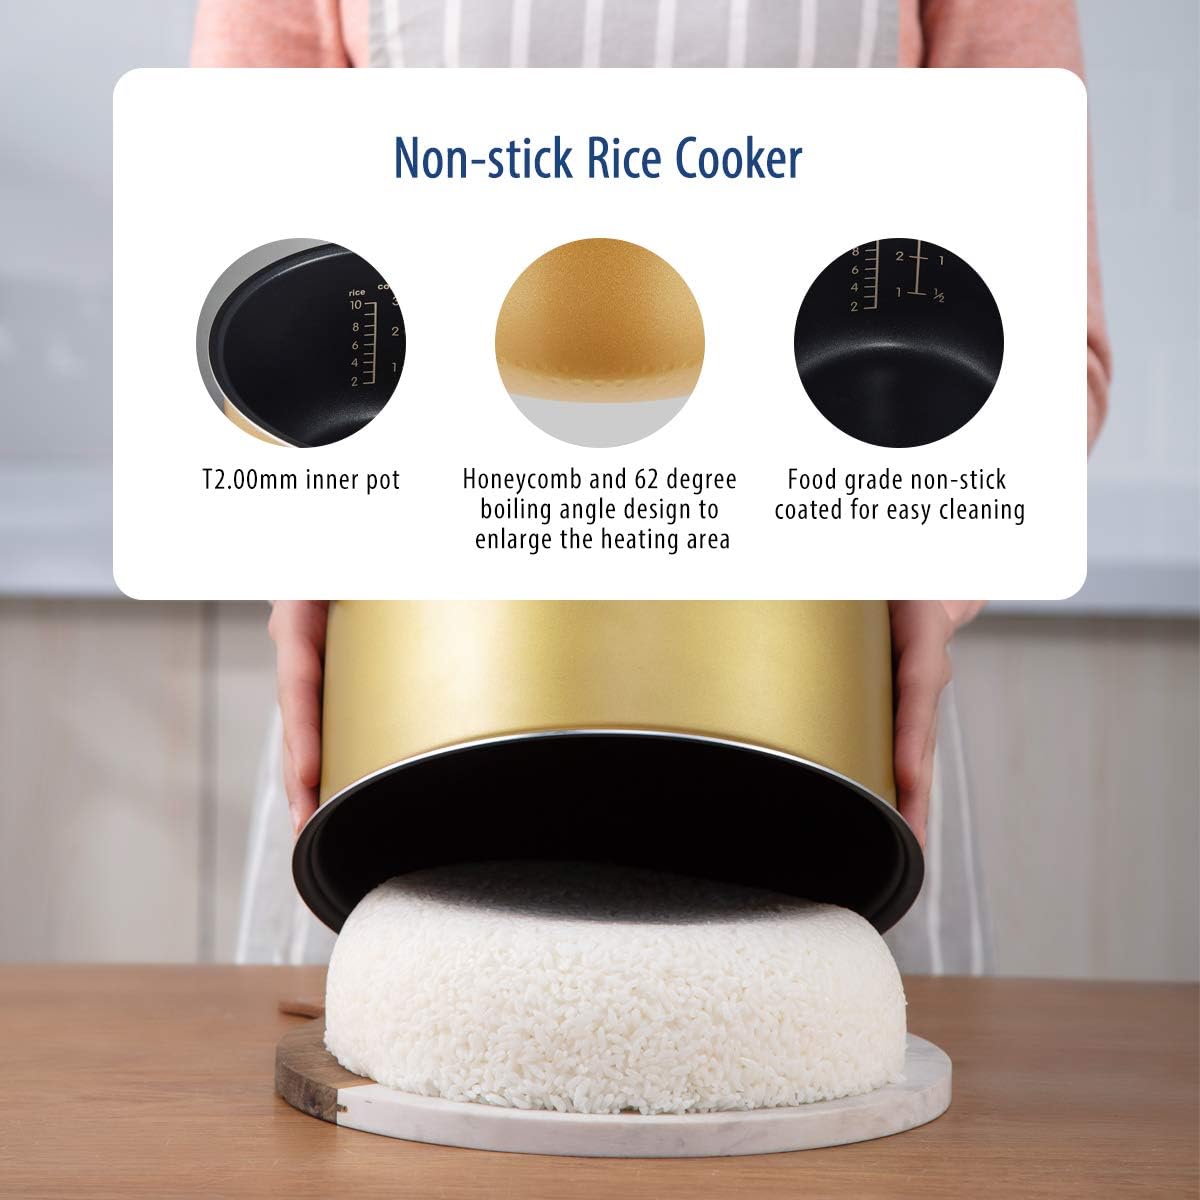 COMFEE' Rice Cooker, Japanese Large Rice Cooker with Fuzzy Logic